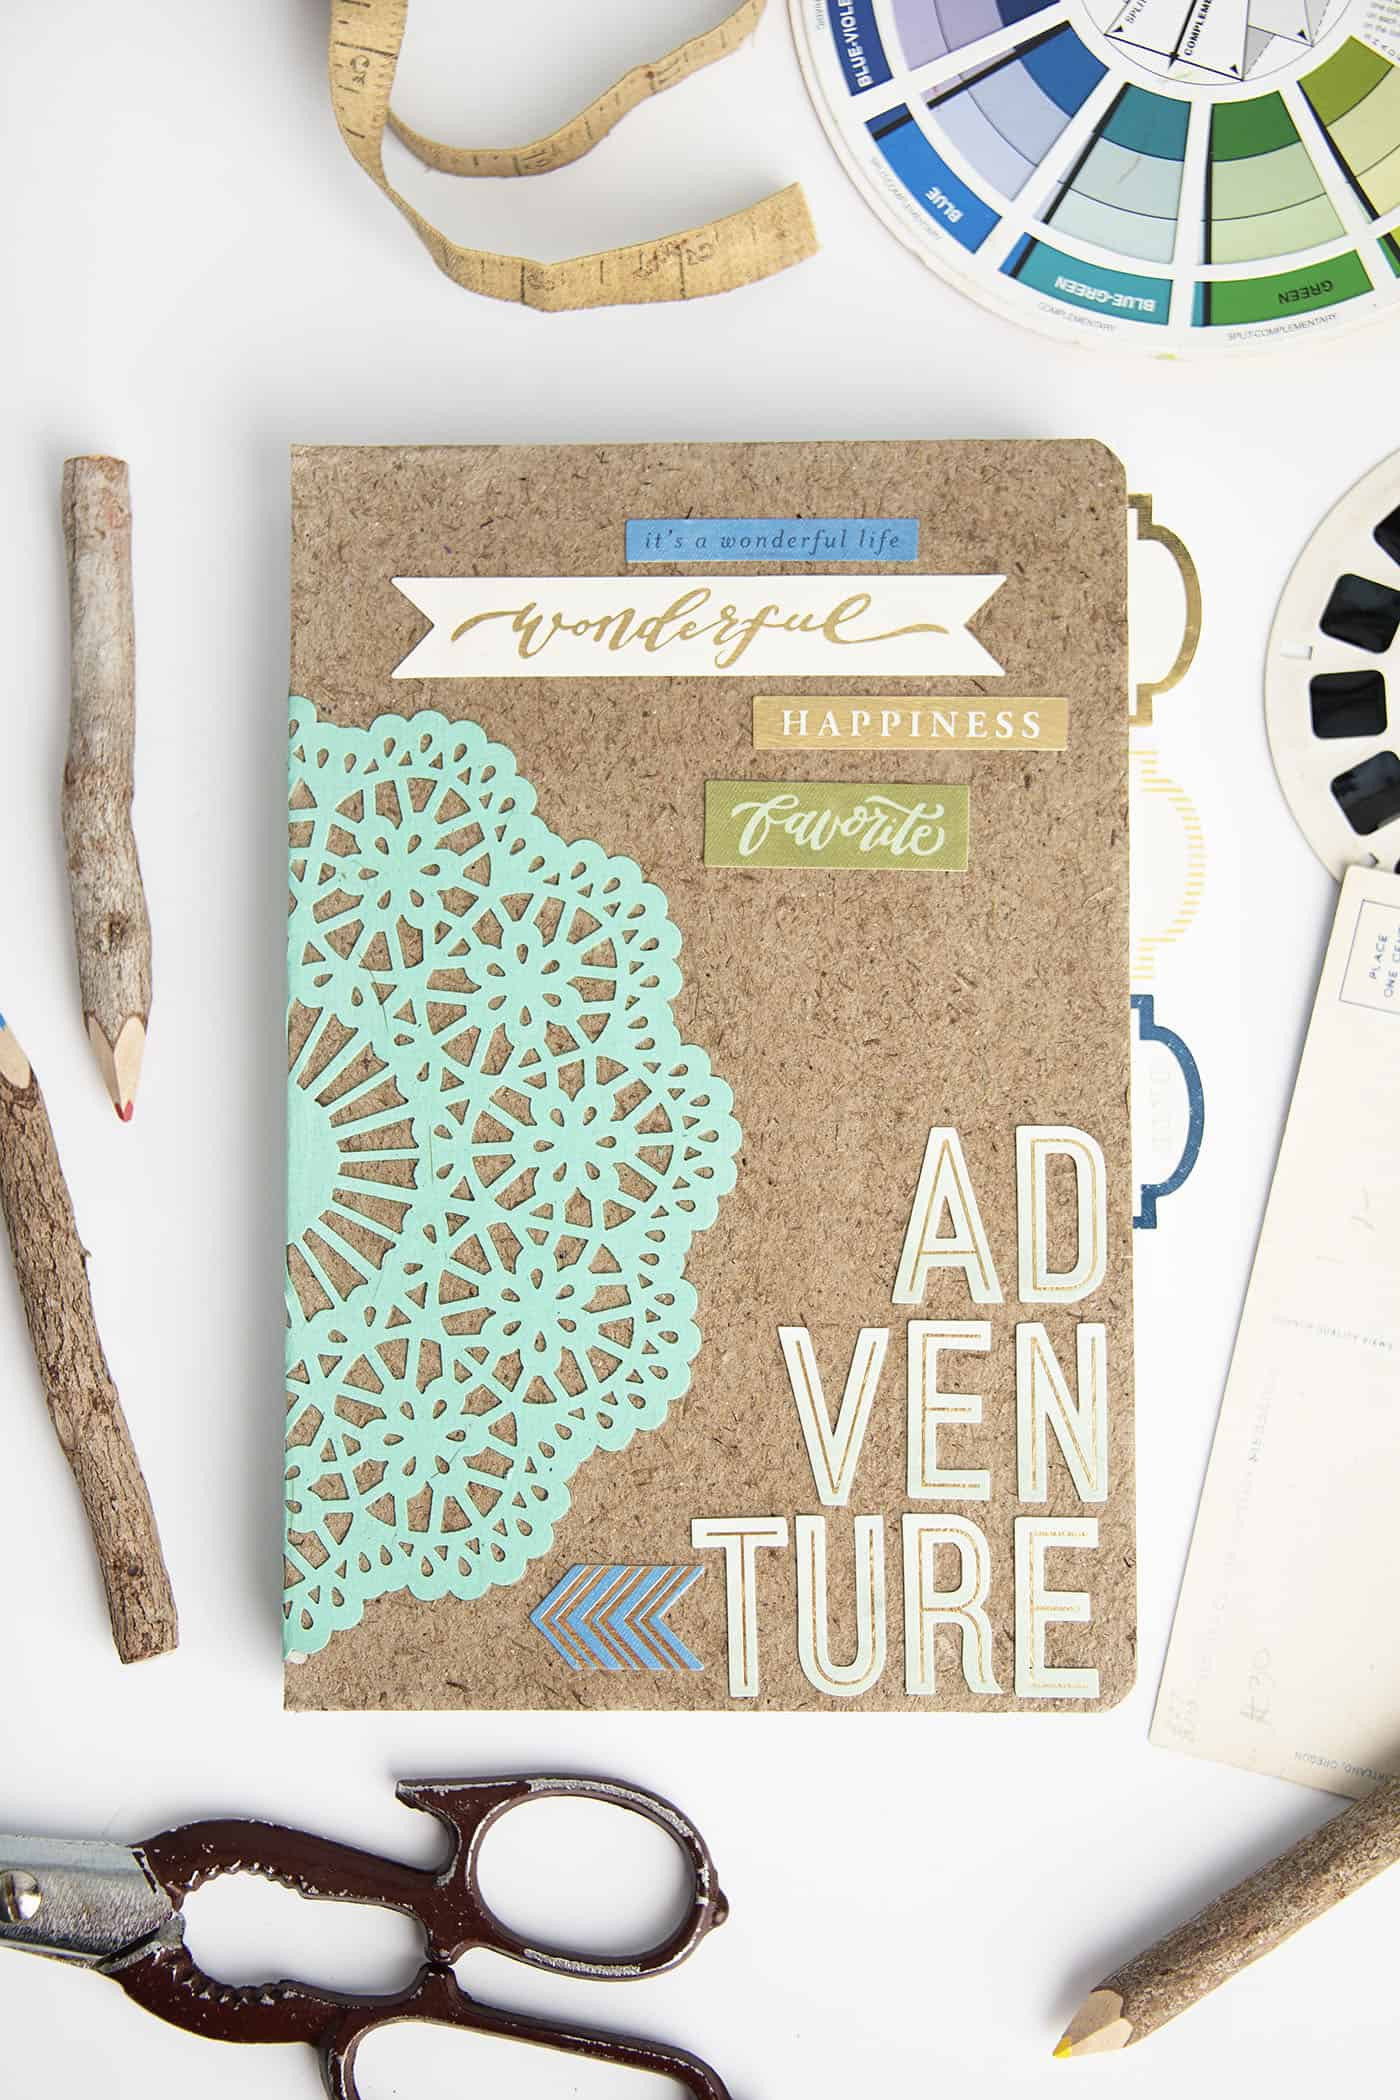 Craft Ideas For Adults To Make And Sell
 Adventure themed DIY Notebook Gift Mod Podge Rocks